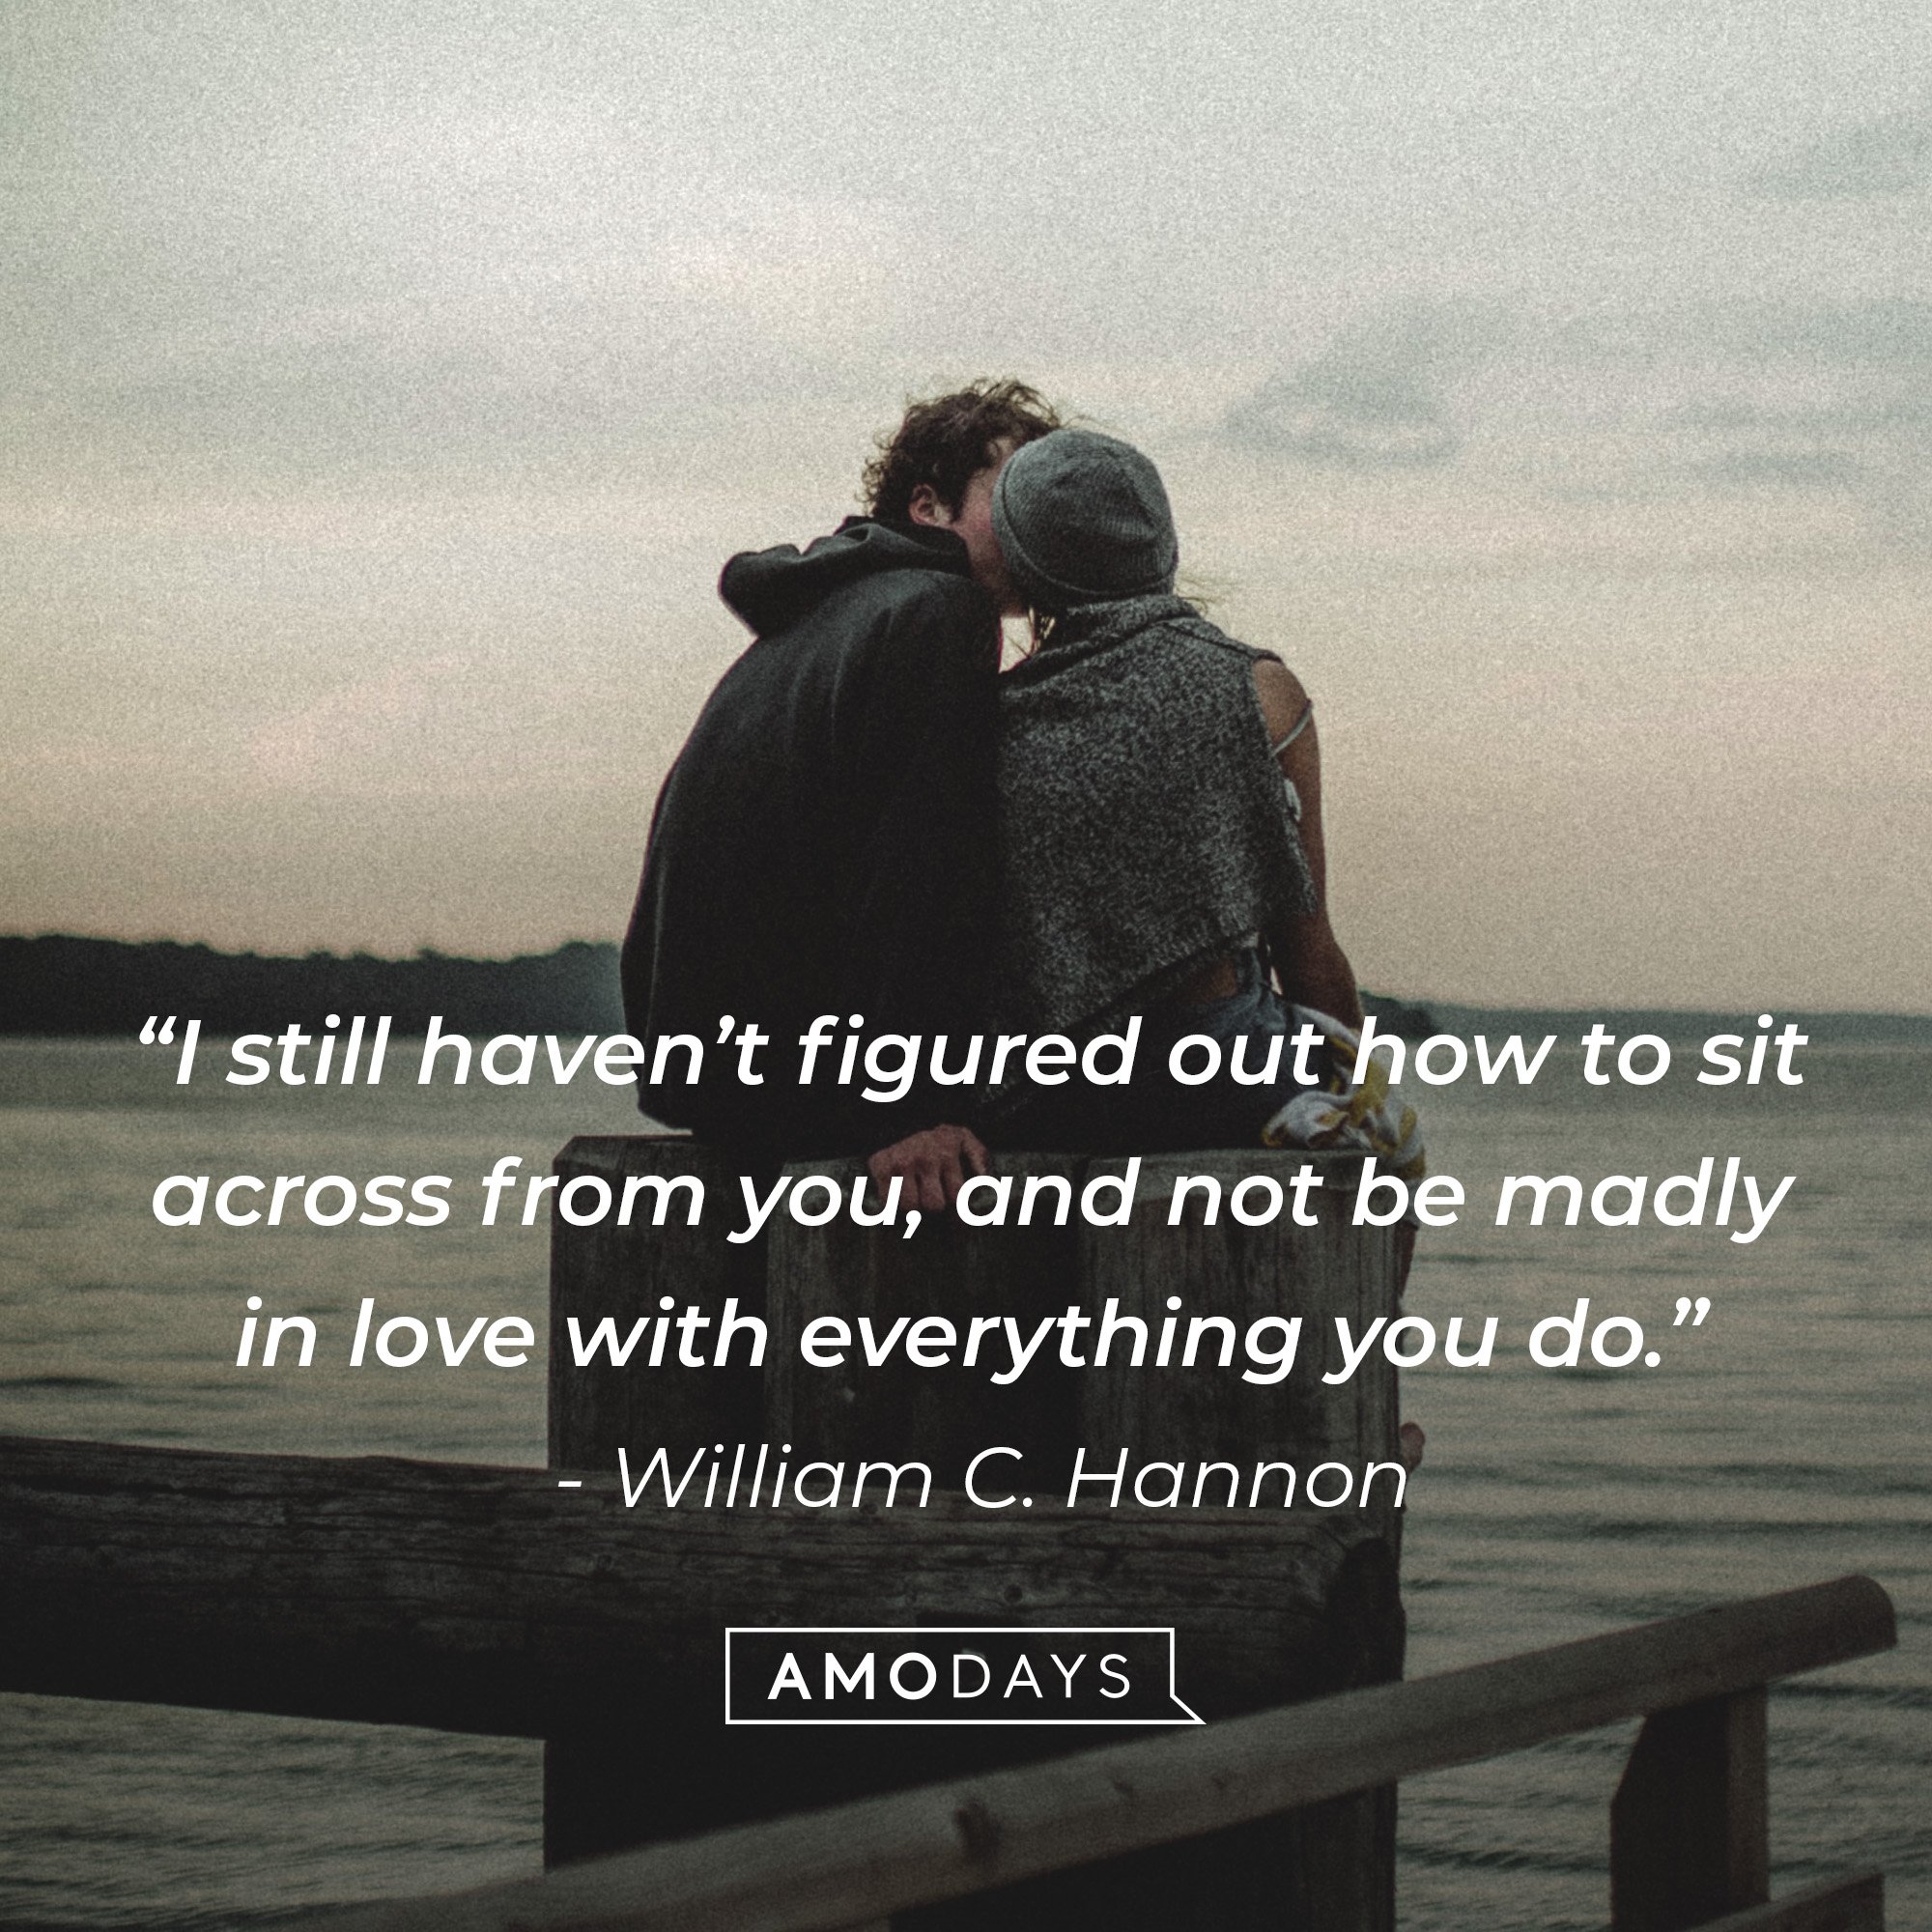  William C. Hannon's quote: “I still haven’t figured out how to sit across from you, and not be madly in love with everything you do.” Image: AmoDays